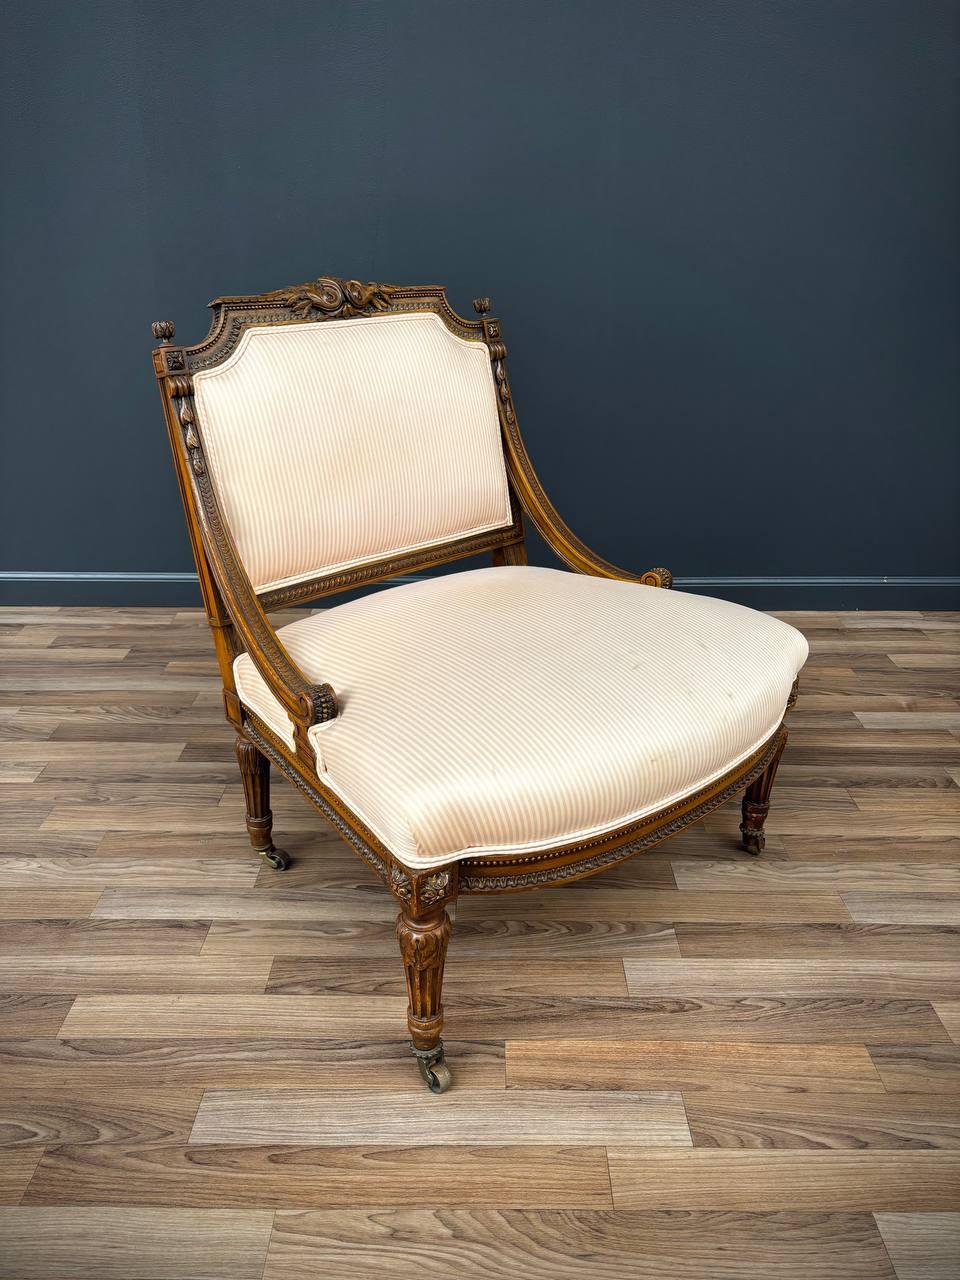 Materials: Carved Wood, Original Upholstery 